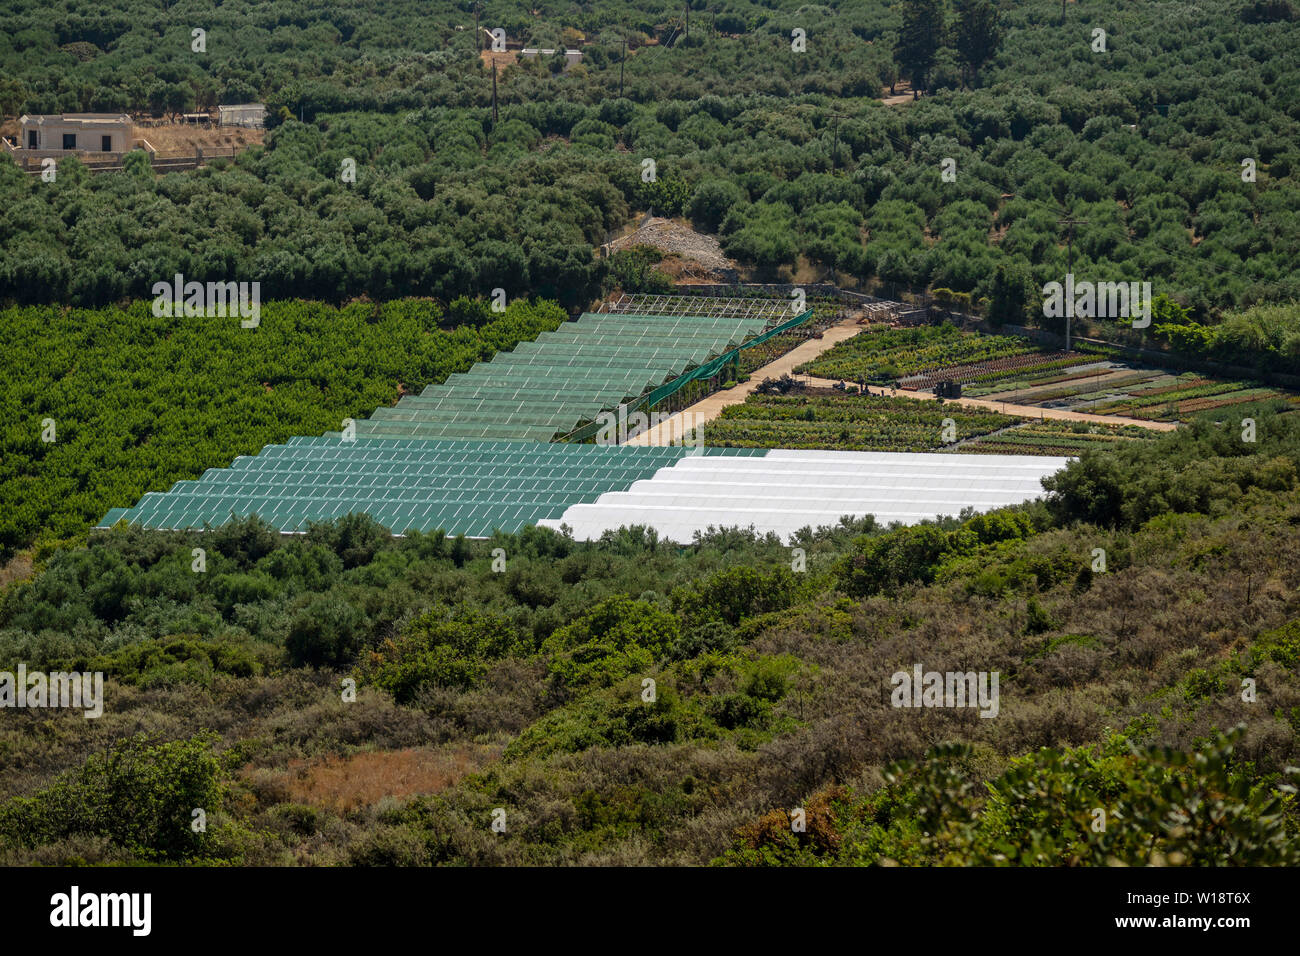 Malia, Crete, Greece. June 2019.  An overview of olive groves and plastic covered area for producing plants . A garden centre. Stock Photo